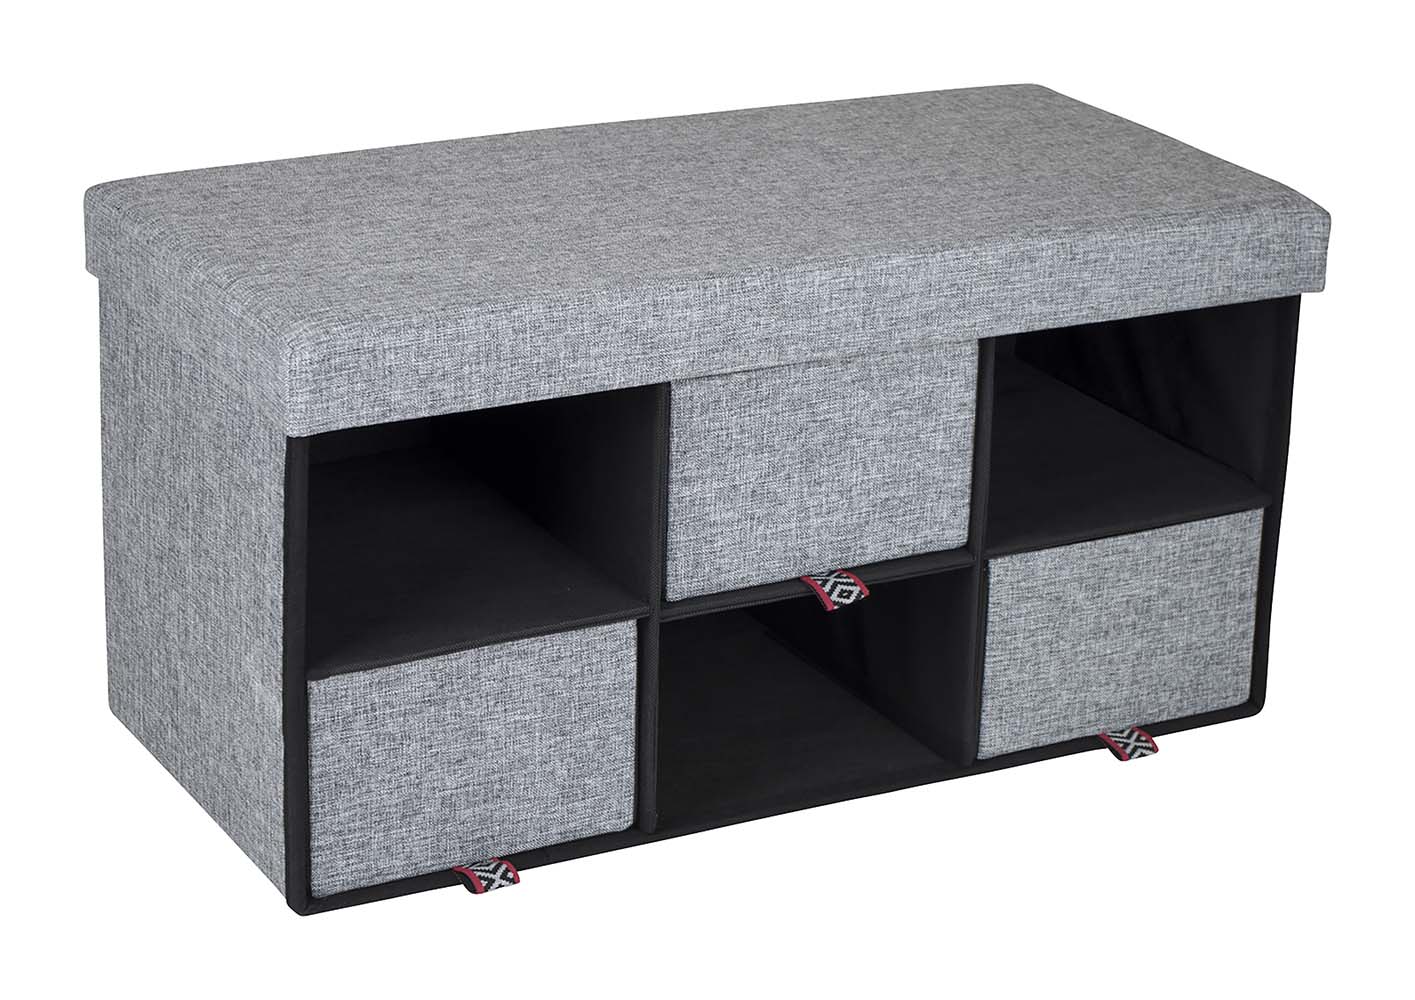 1609345 A trendy ottoman with 6 storage compartments. Offers seating for 2 persons. Suitable for storage purposes but also to sit on. Padded lid for extra sitting comfort. Made of Oxford Polyester with a linen look. Supplied with 3 drawers.